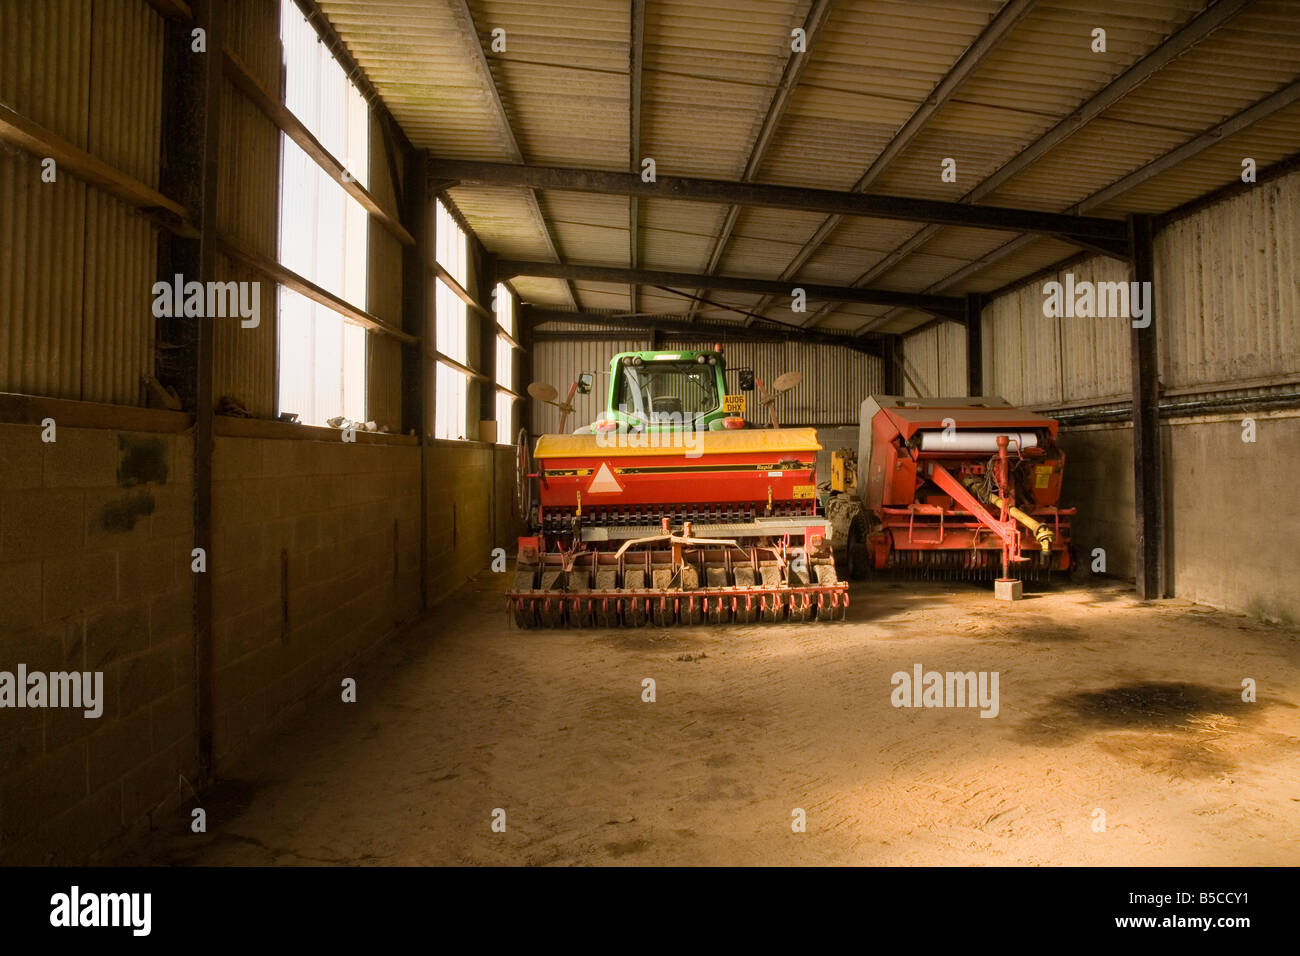 Farming vehicles in a shed Stock Photo